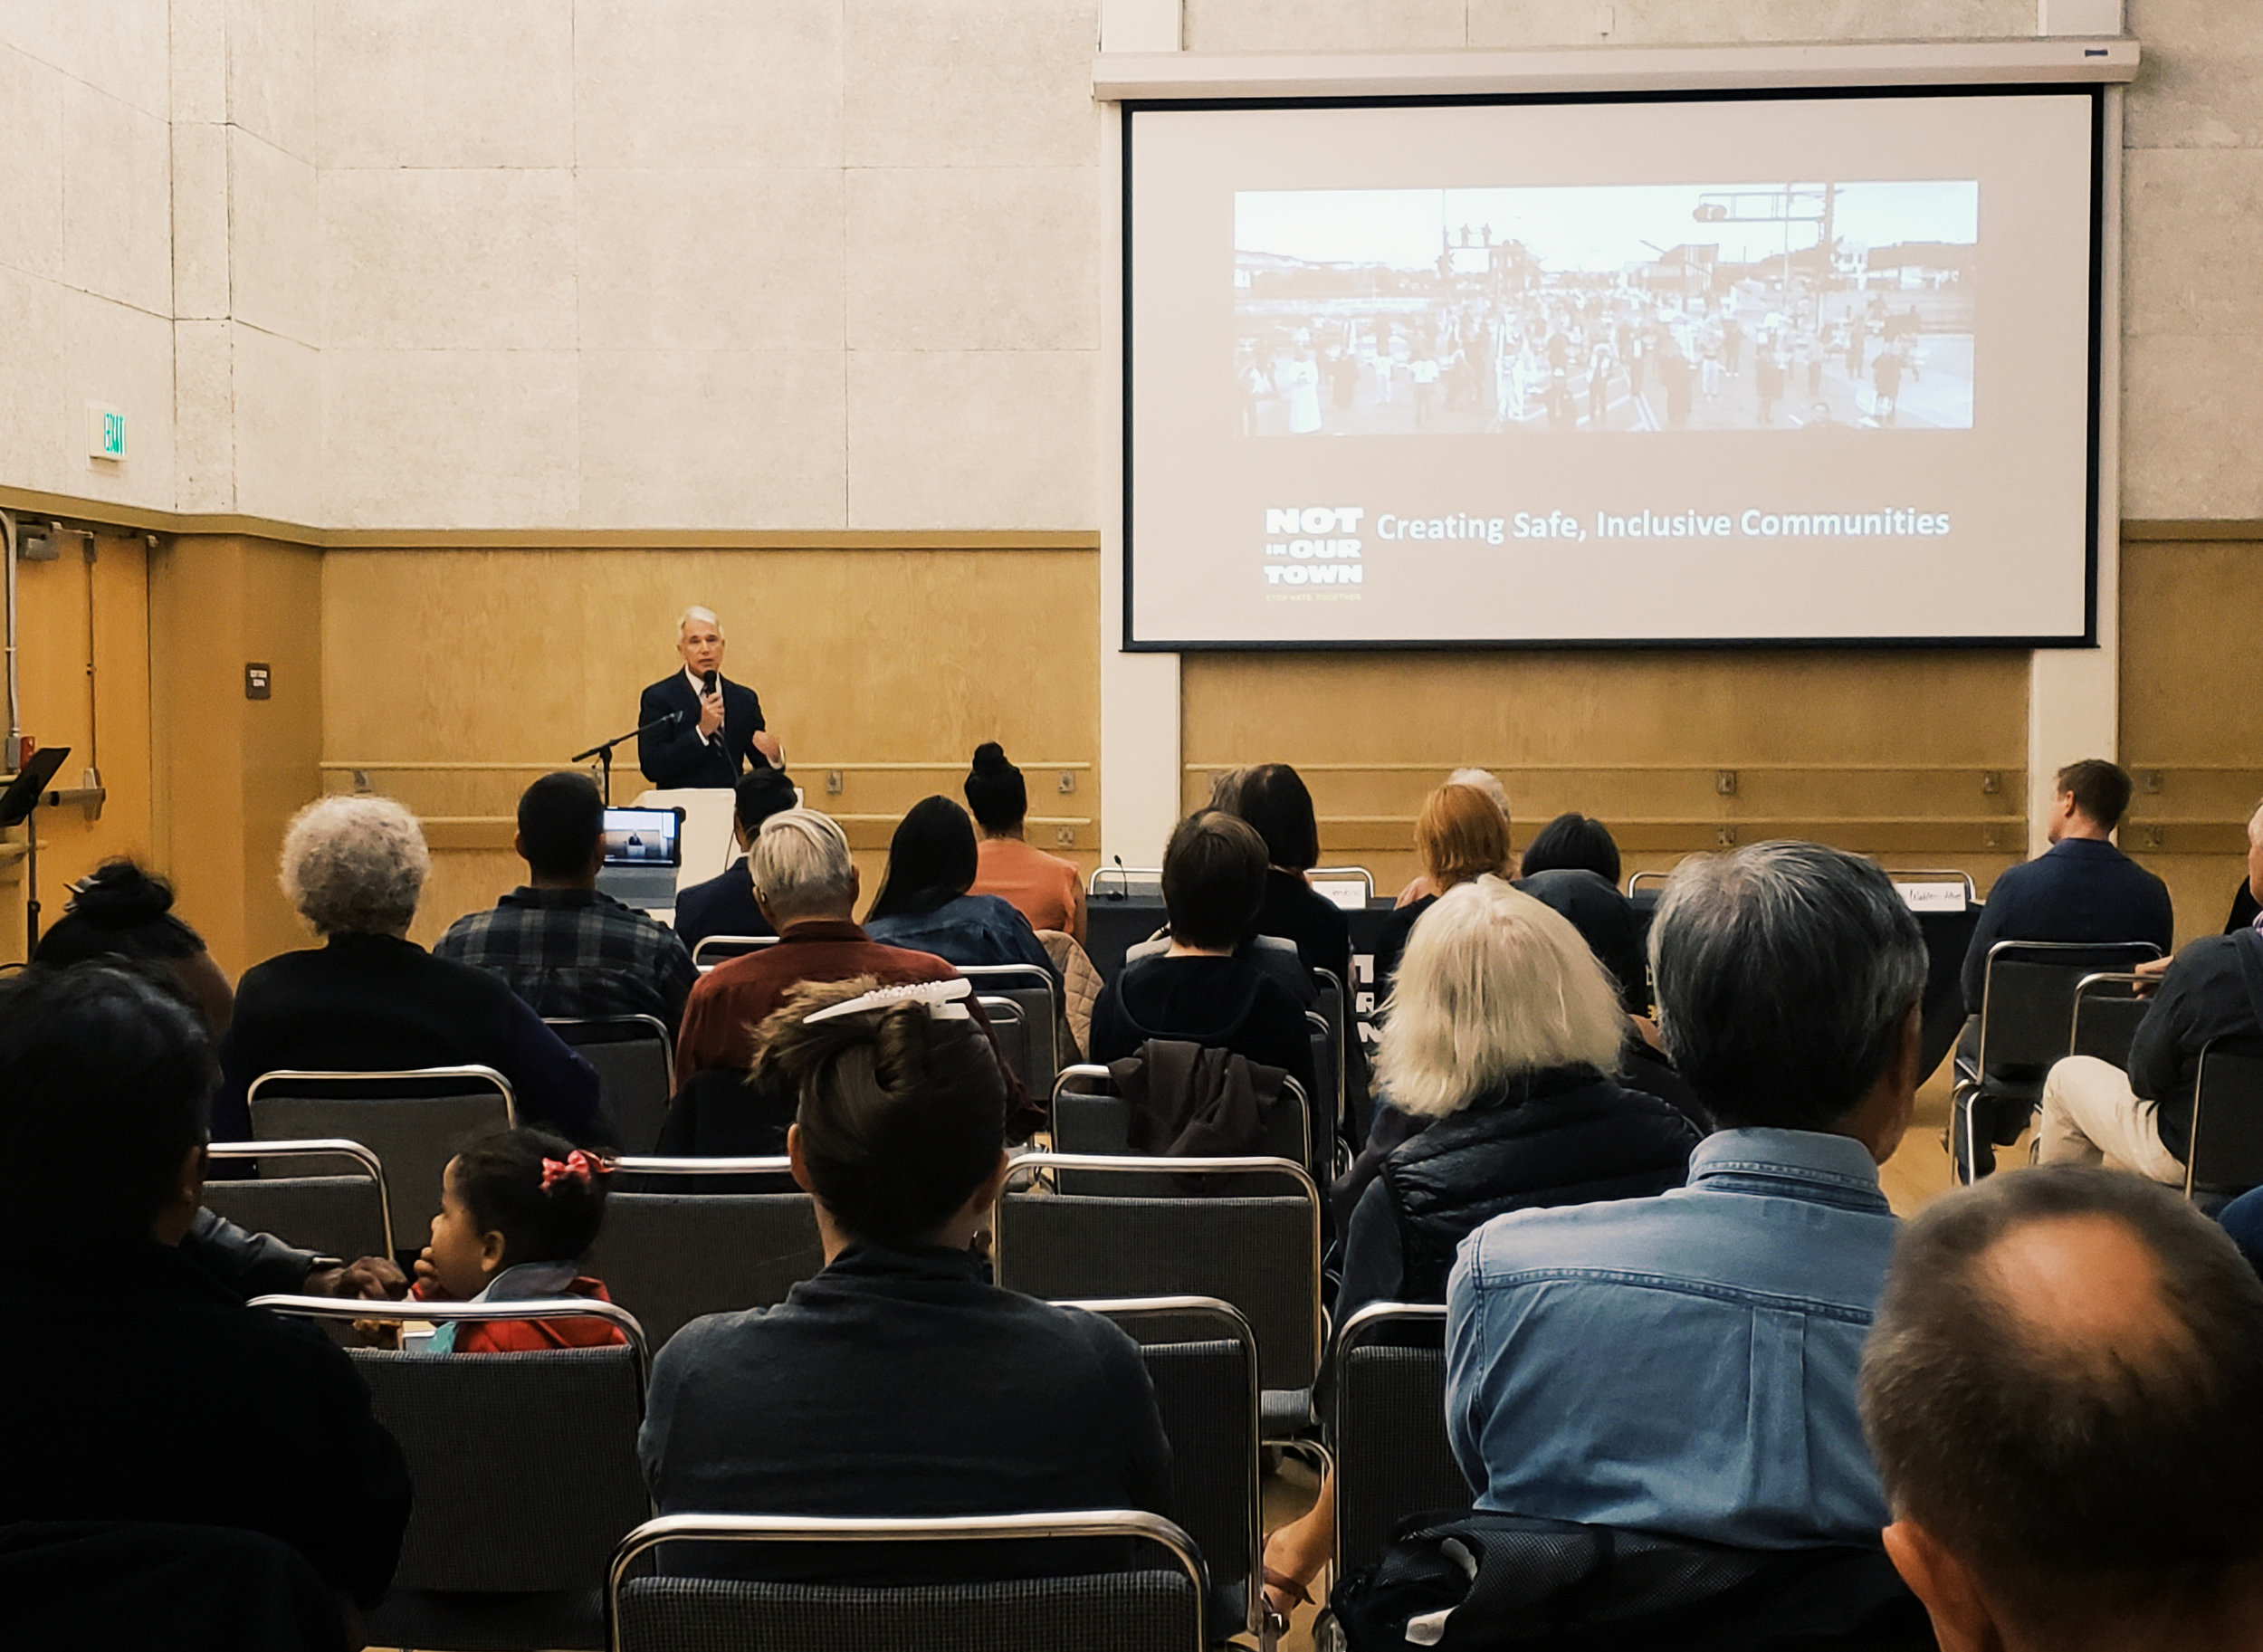 San Francisco District Attorney George Gascón introduces “Light in the Darkness” at the SF screening and community discussion earlier this month.